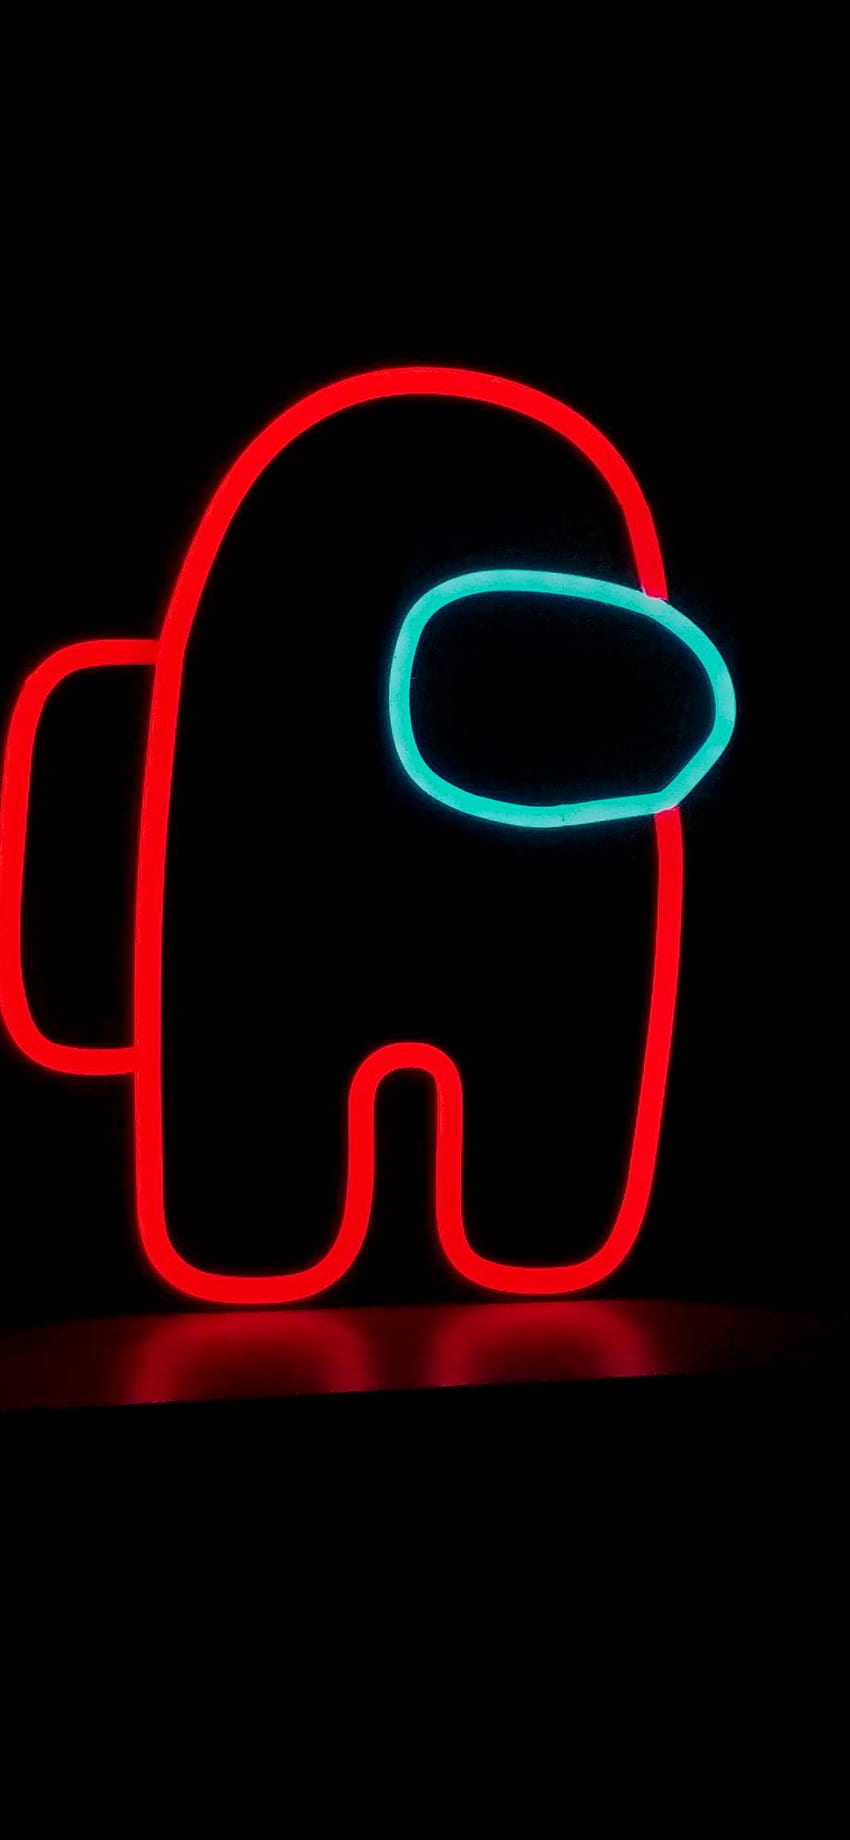 Among Us , Neon, iOS Games, Android Games, PC Games, Black/Dark, neon iphone 12 pro max HD phone wallpaper